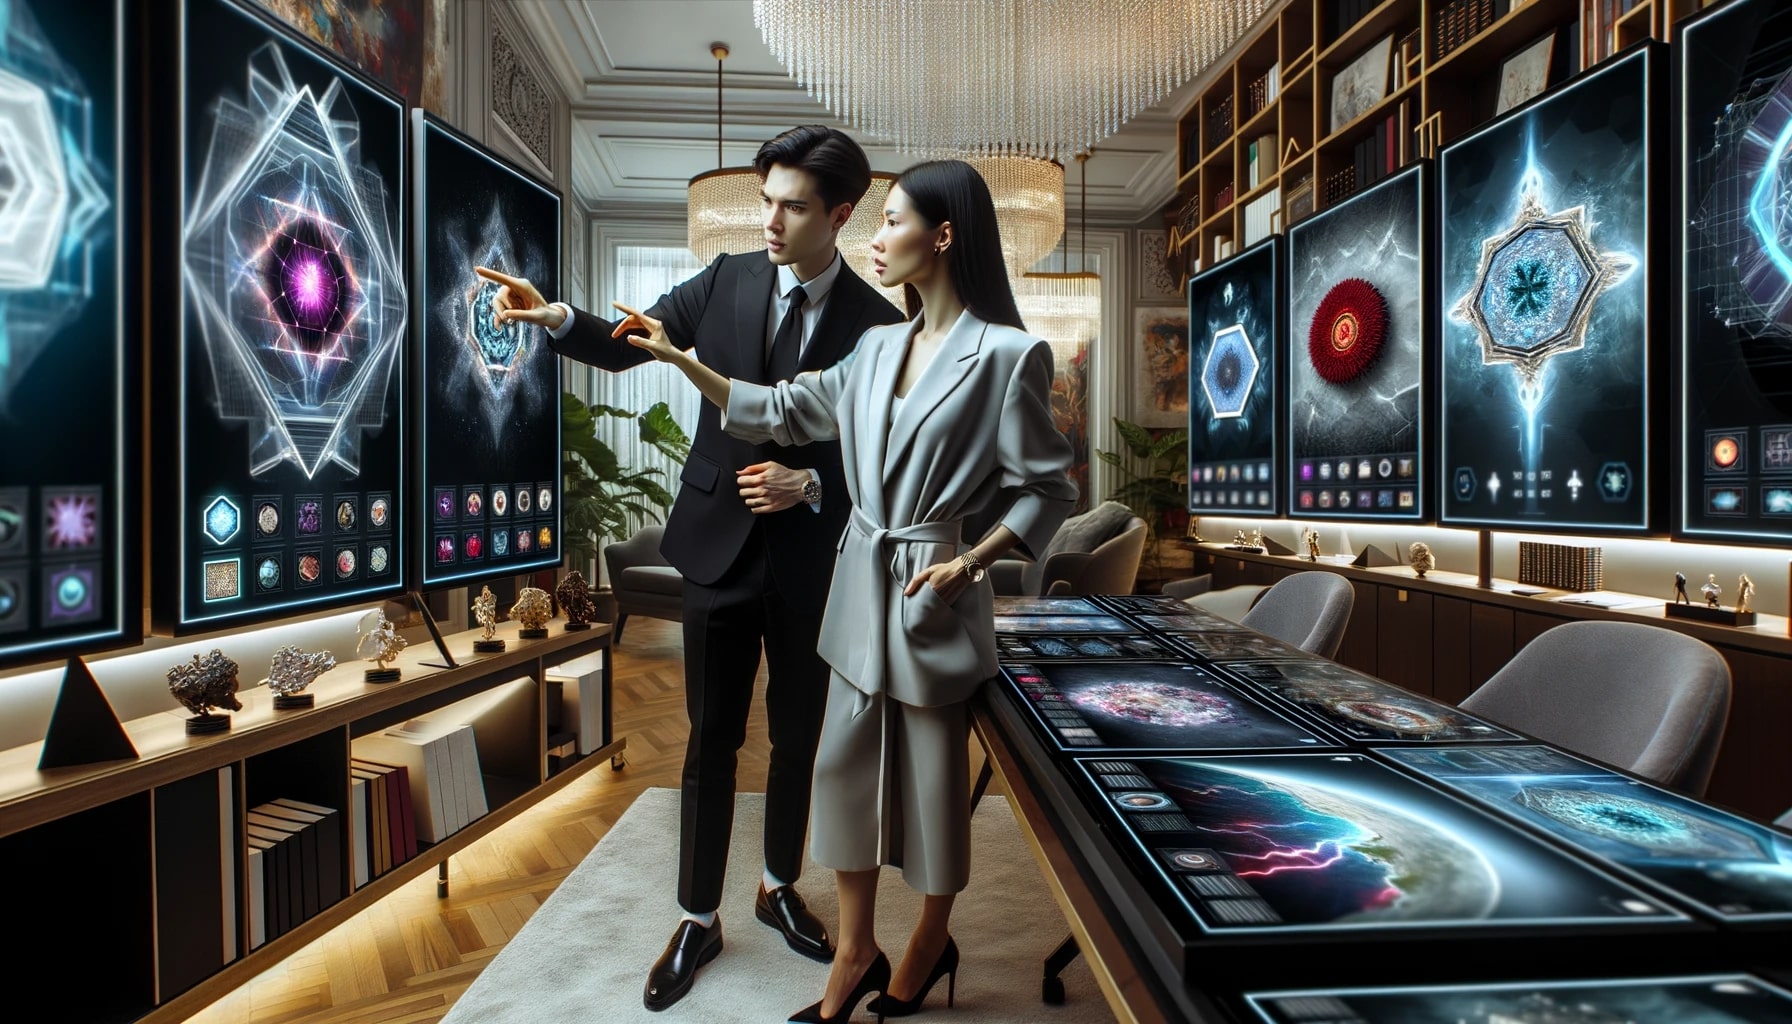 Photo of a sophisticated office space where a Caucasian female and an Asian male are examining a digital screen displaying an NFT of a unique piece of digital artwork. They are surrounded by other digital screens showcasing various NFT collectibles. The room is decorated with modern art and has a luxurious feel.